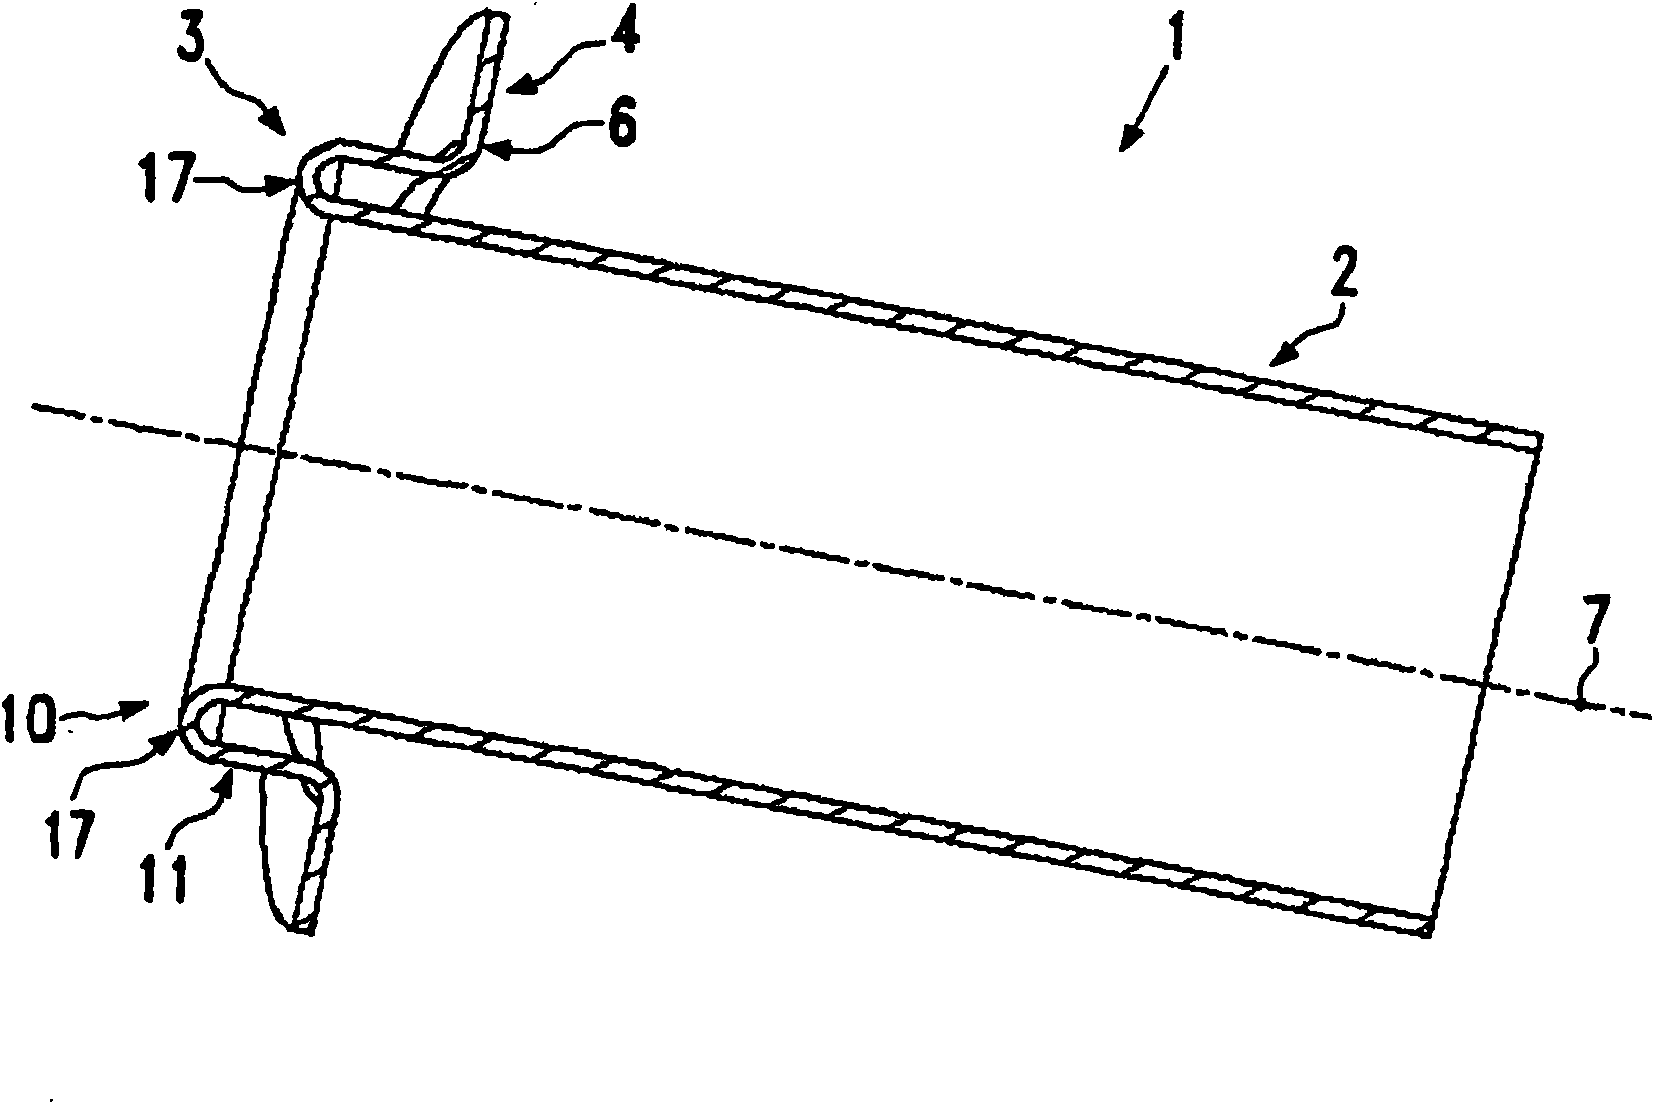 Energy absorption device